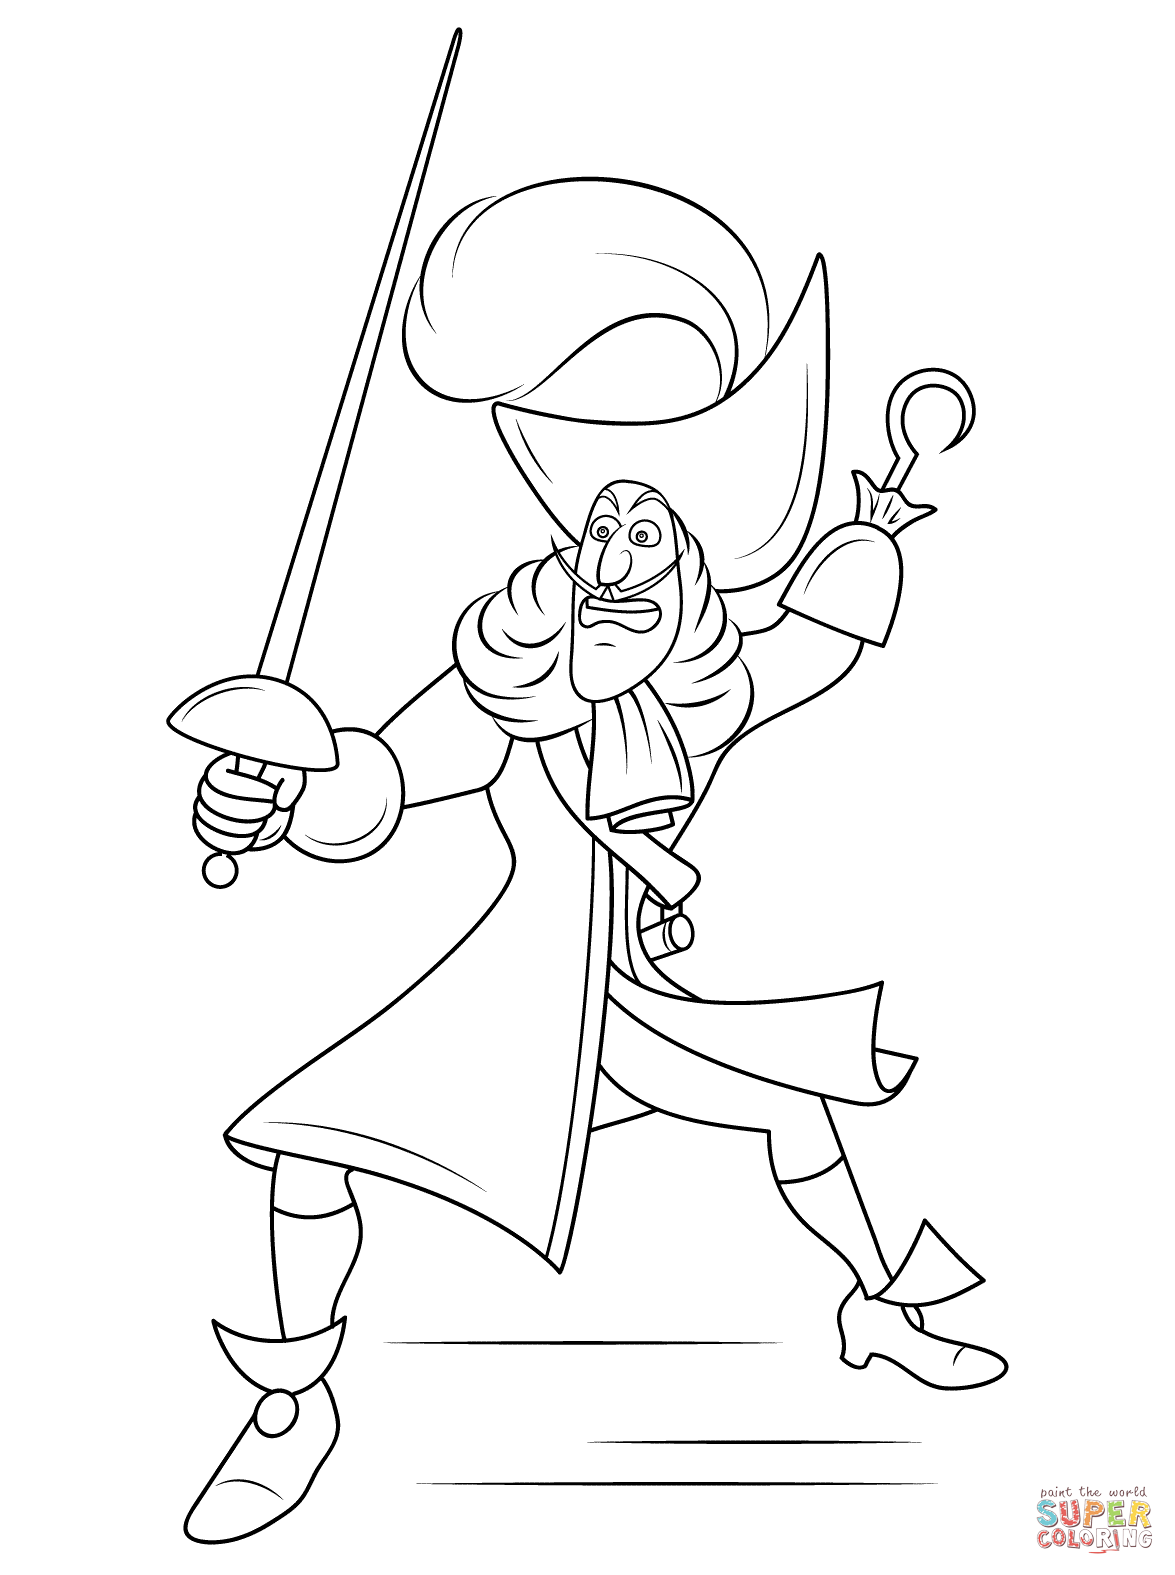 Disney Captain Hook coloring page | Free Printable Coloring Pages